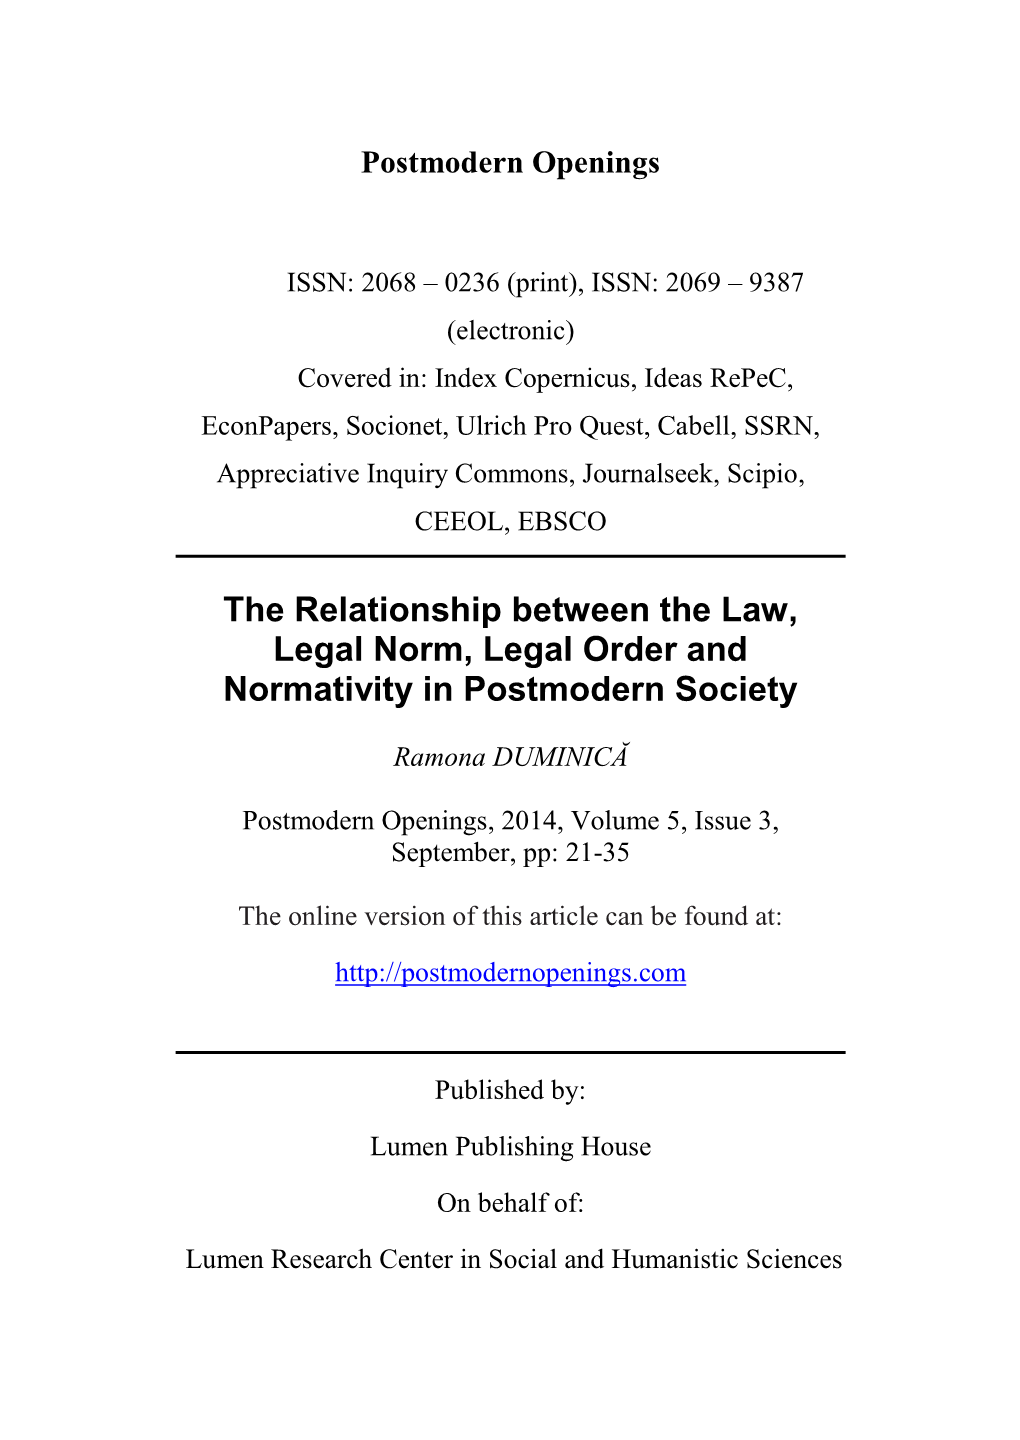 The Relationship Between the Law, Legal Norm, Legal Order and Normativity in Postmodern Society